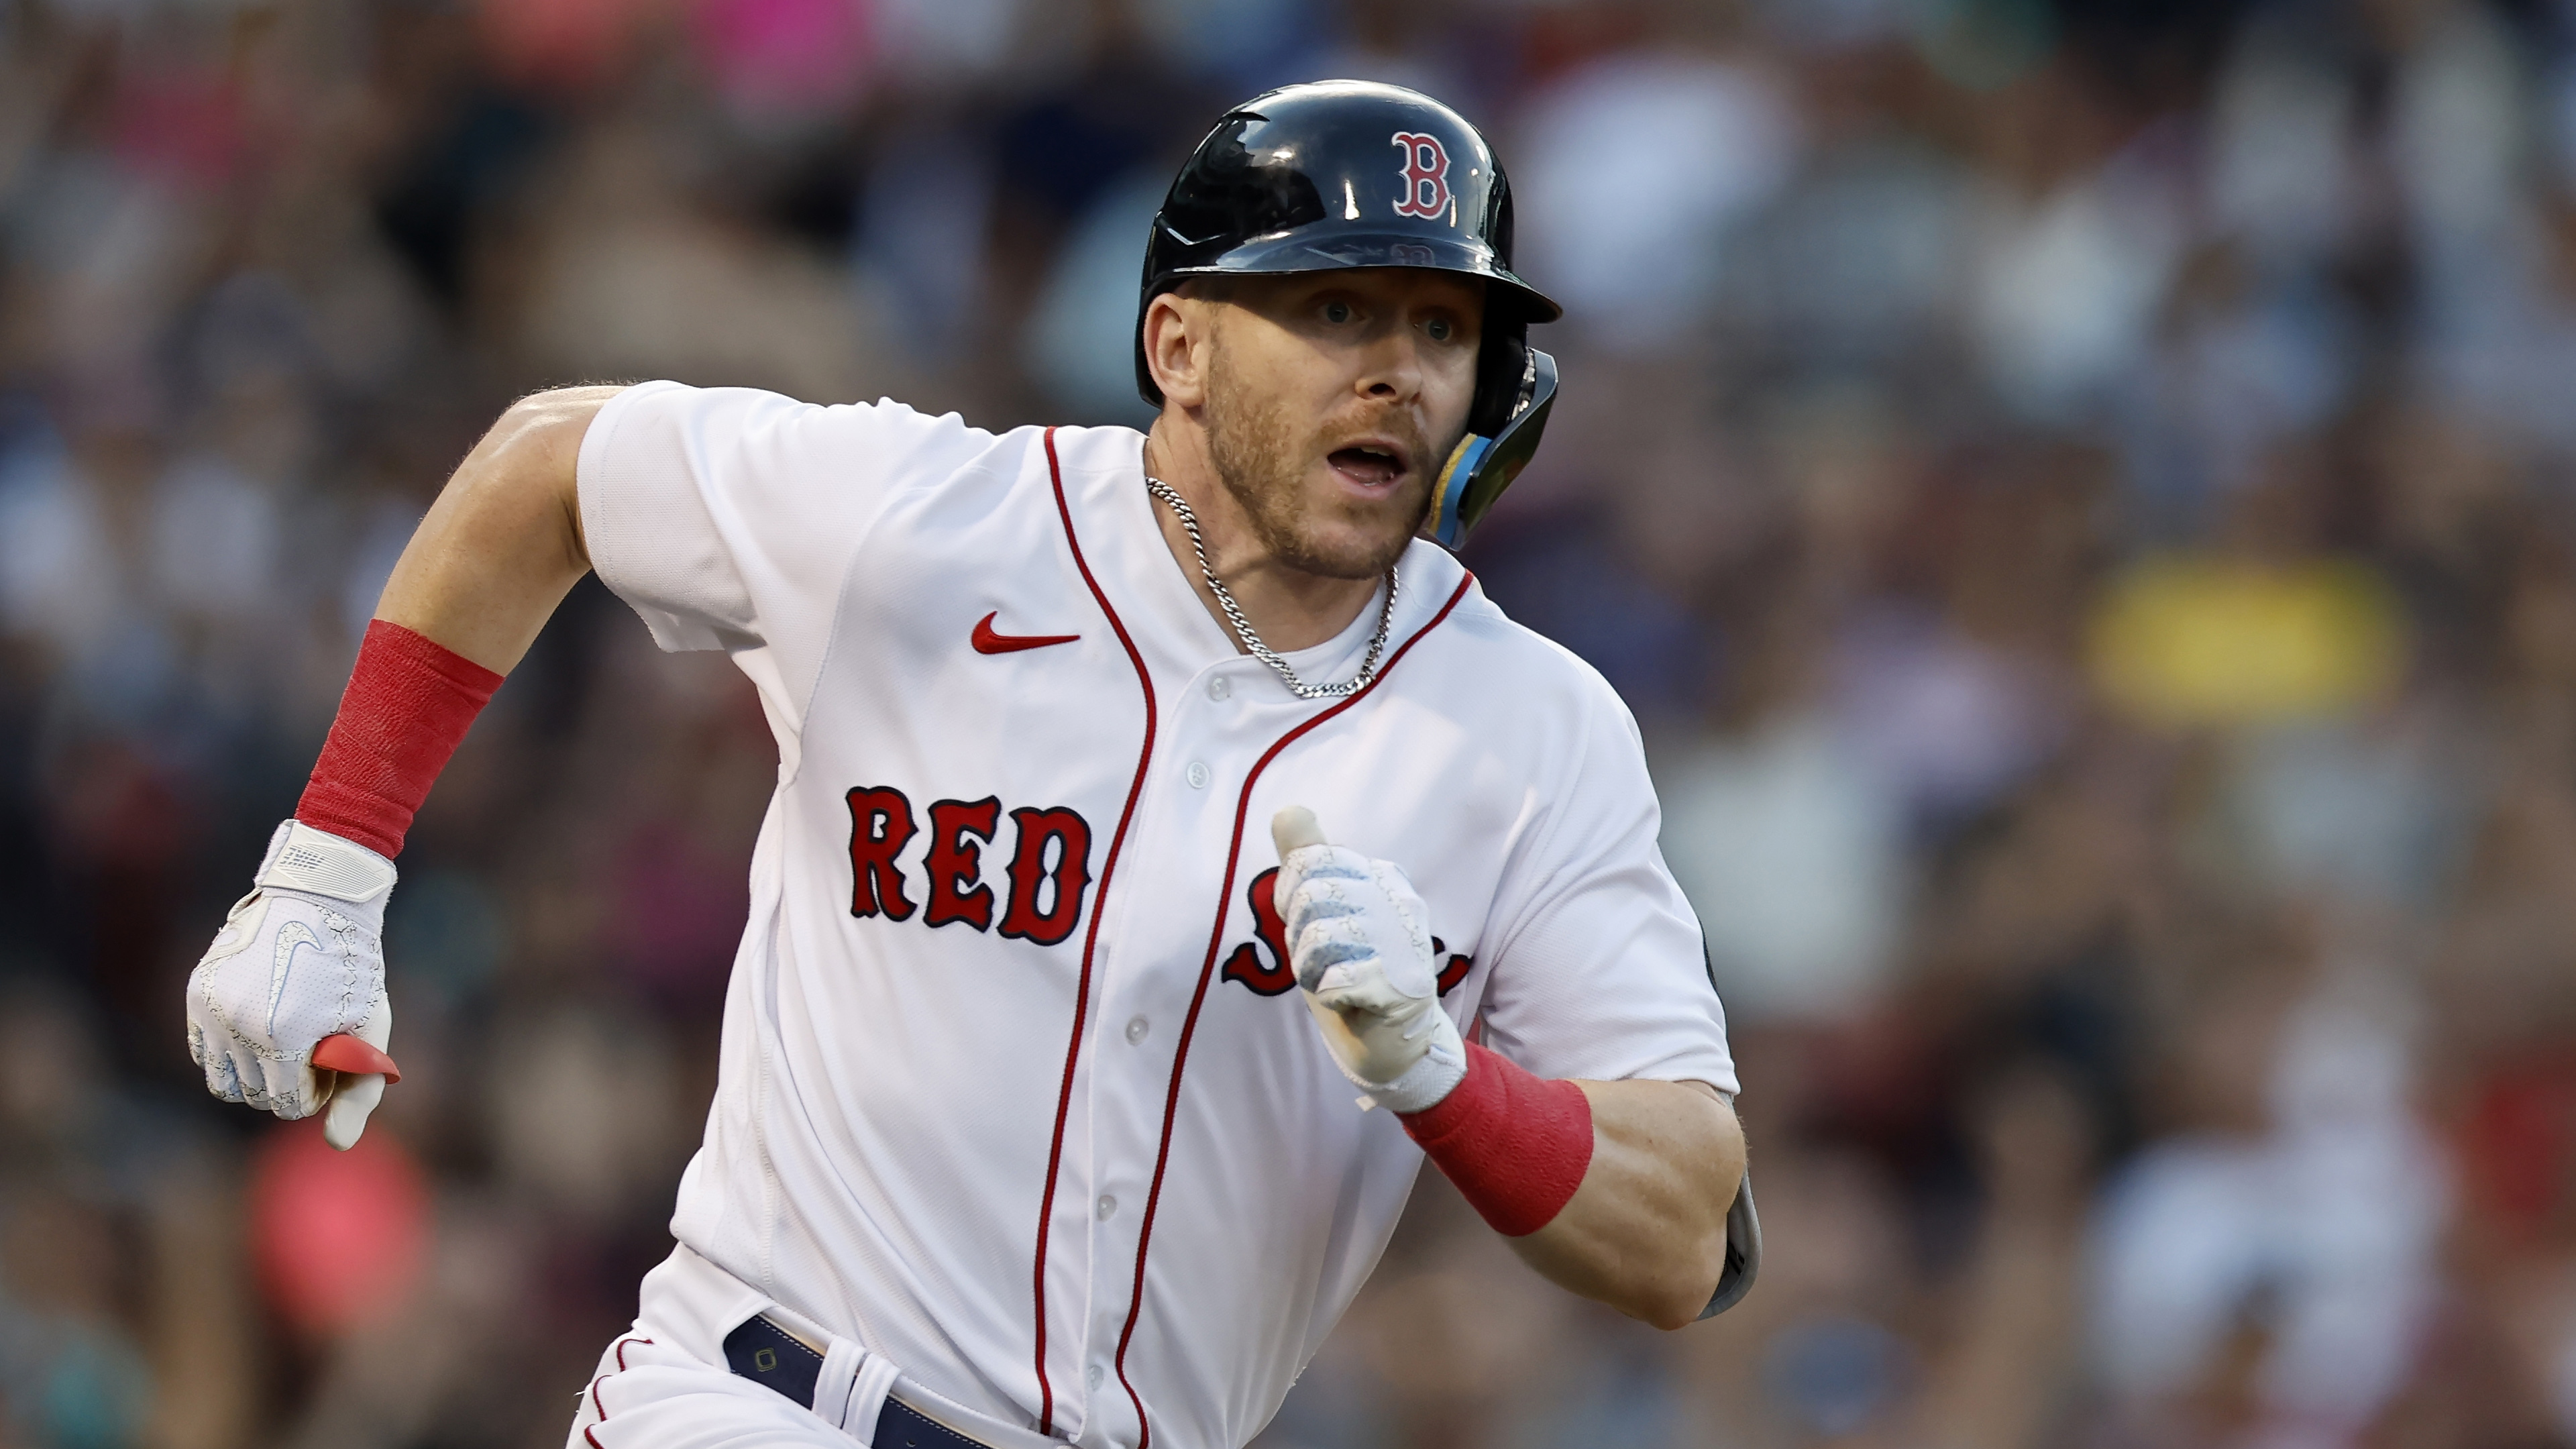 Trevor Story (sore left heel) not in Red Sox lineup for Tuesday's